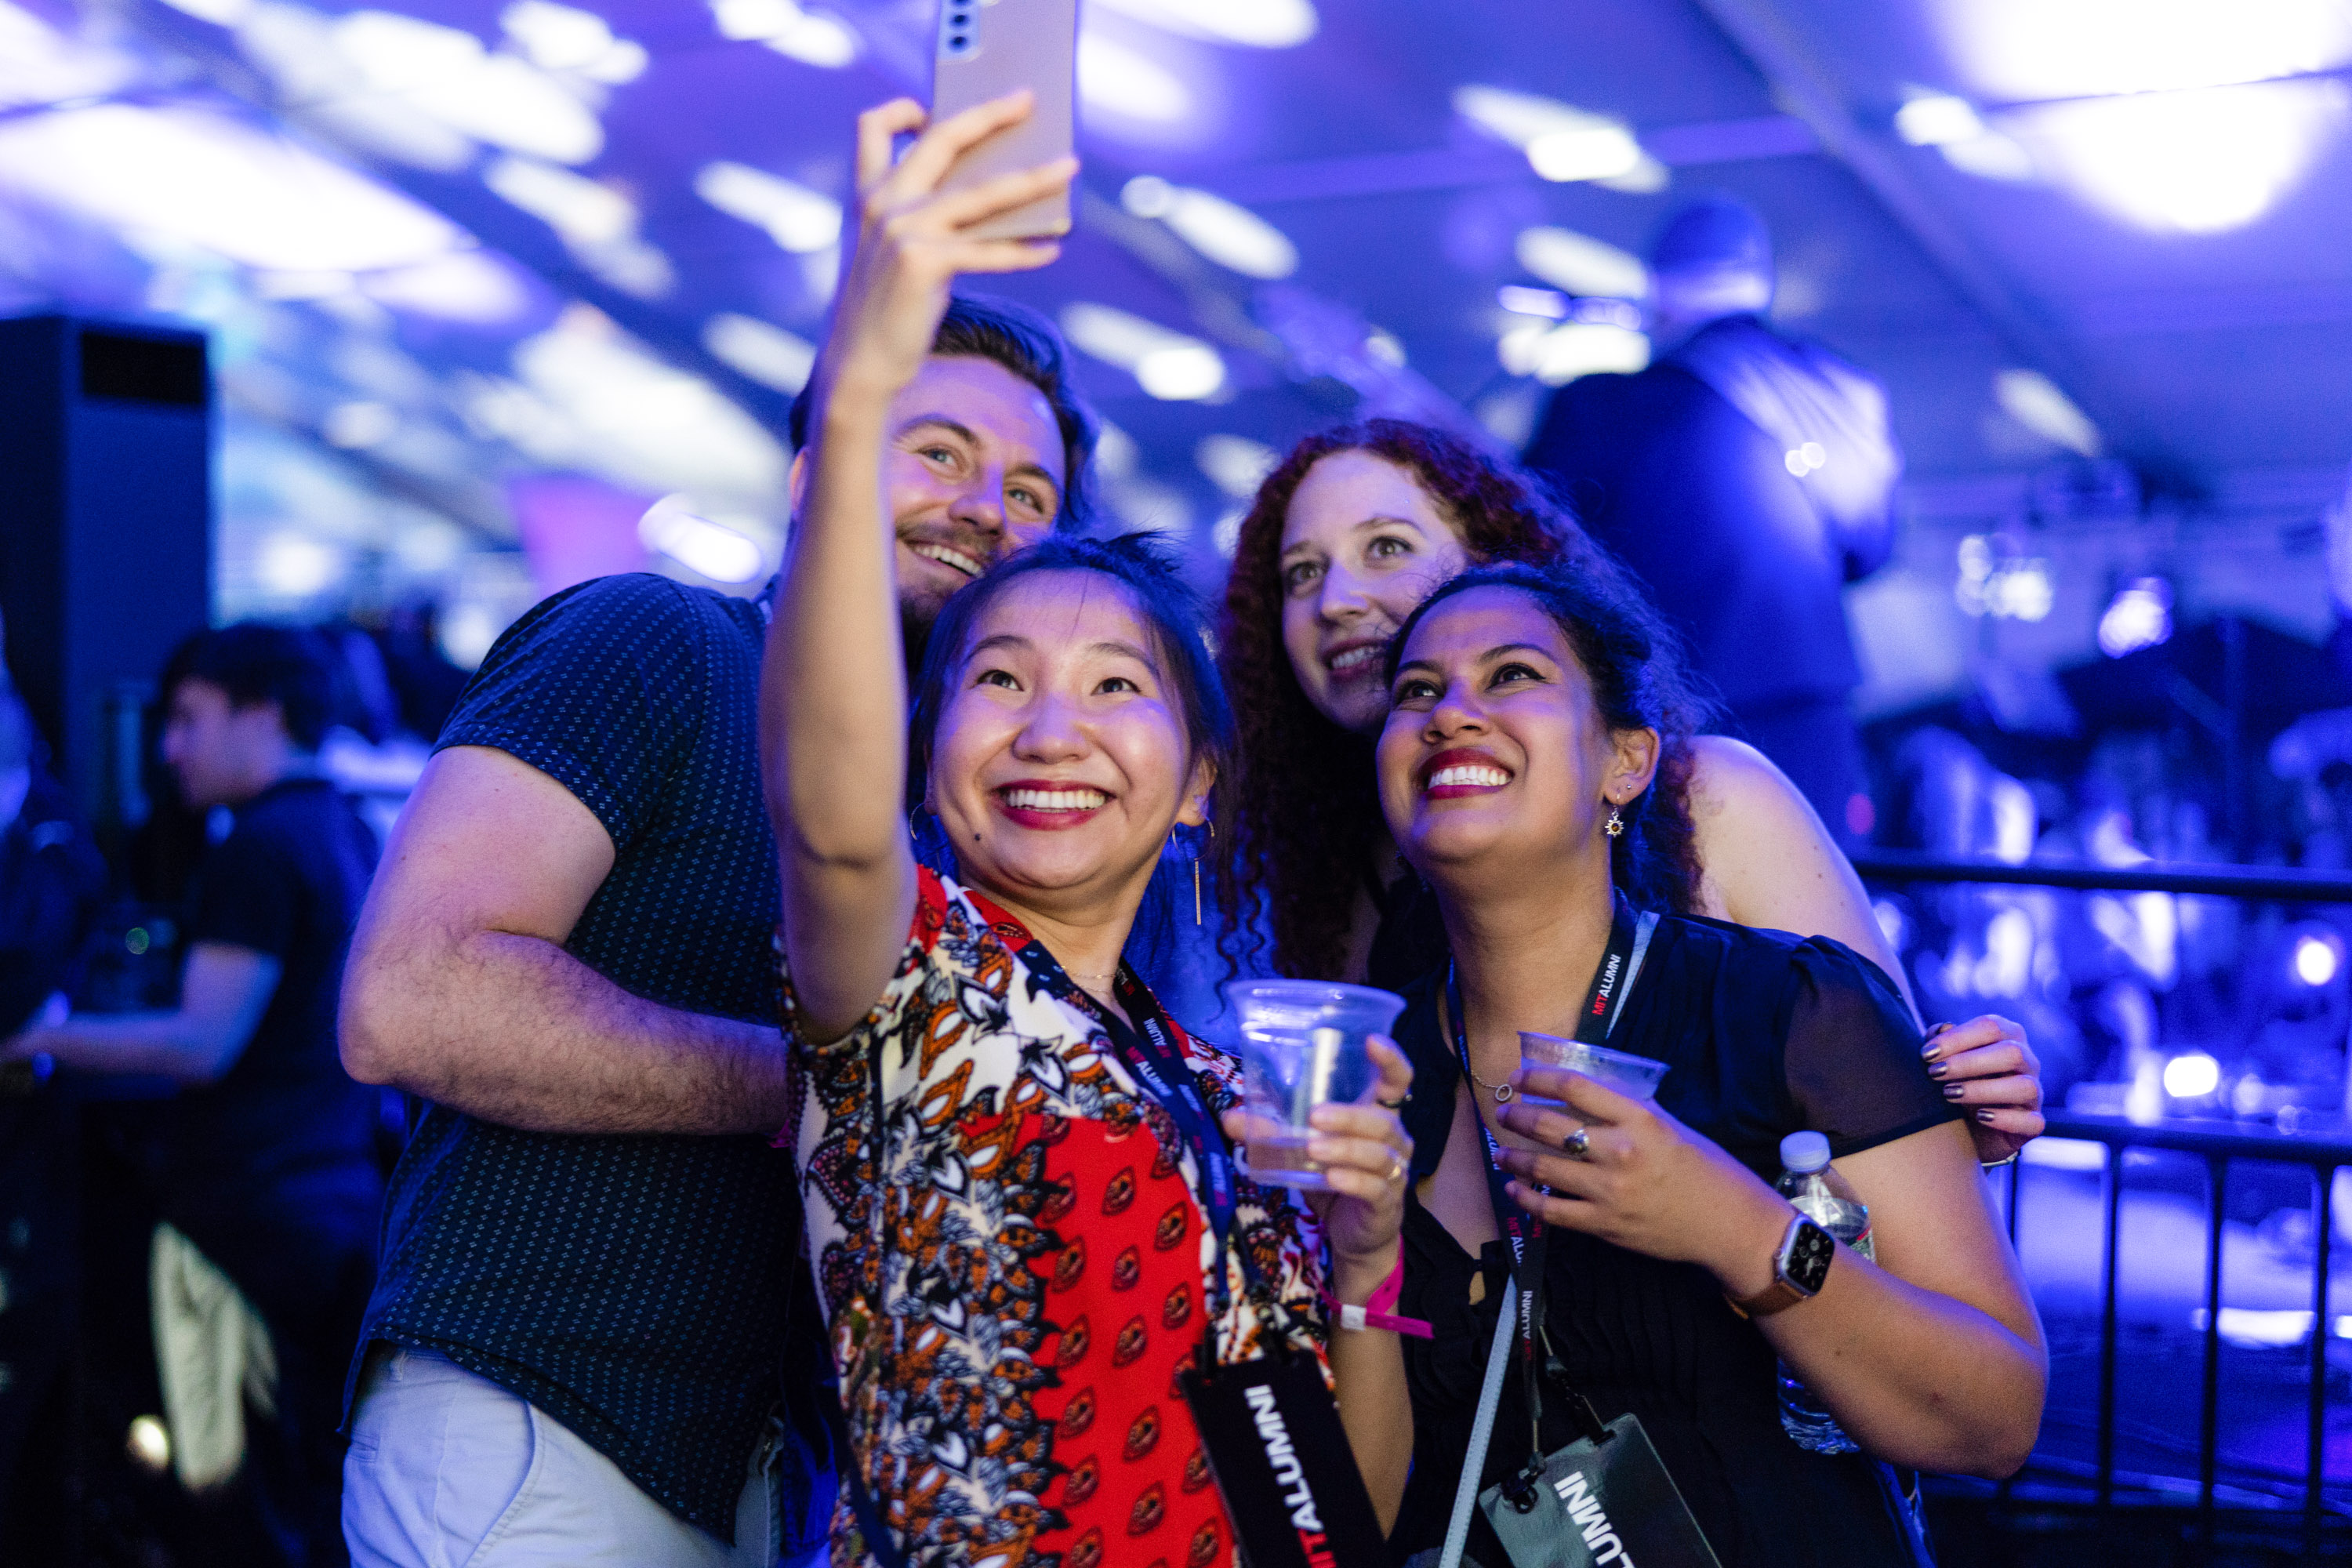 Tech Reunions returns to MIT’s campus for a historical birthday celebration